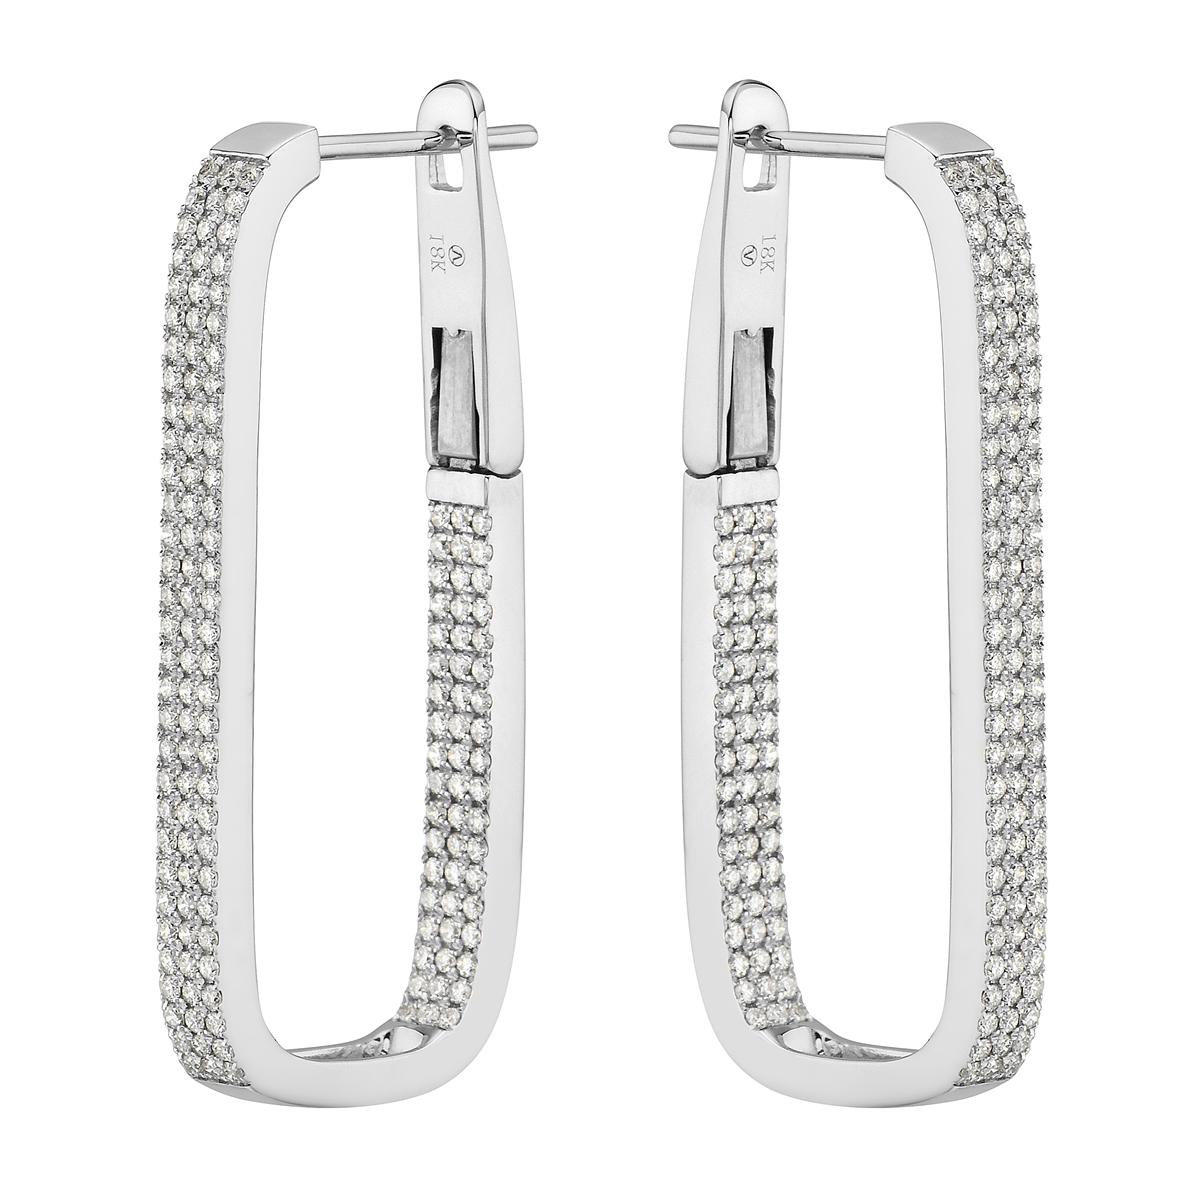 With these exquisite white gold diamond hoop earrings, style and glamour are in the spotlight. These hoop earrings are set in 18-karat gold and made from 10.1 grams of gold. The color of the diamonds is G. The clarity is VS2. These earrings are made